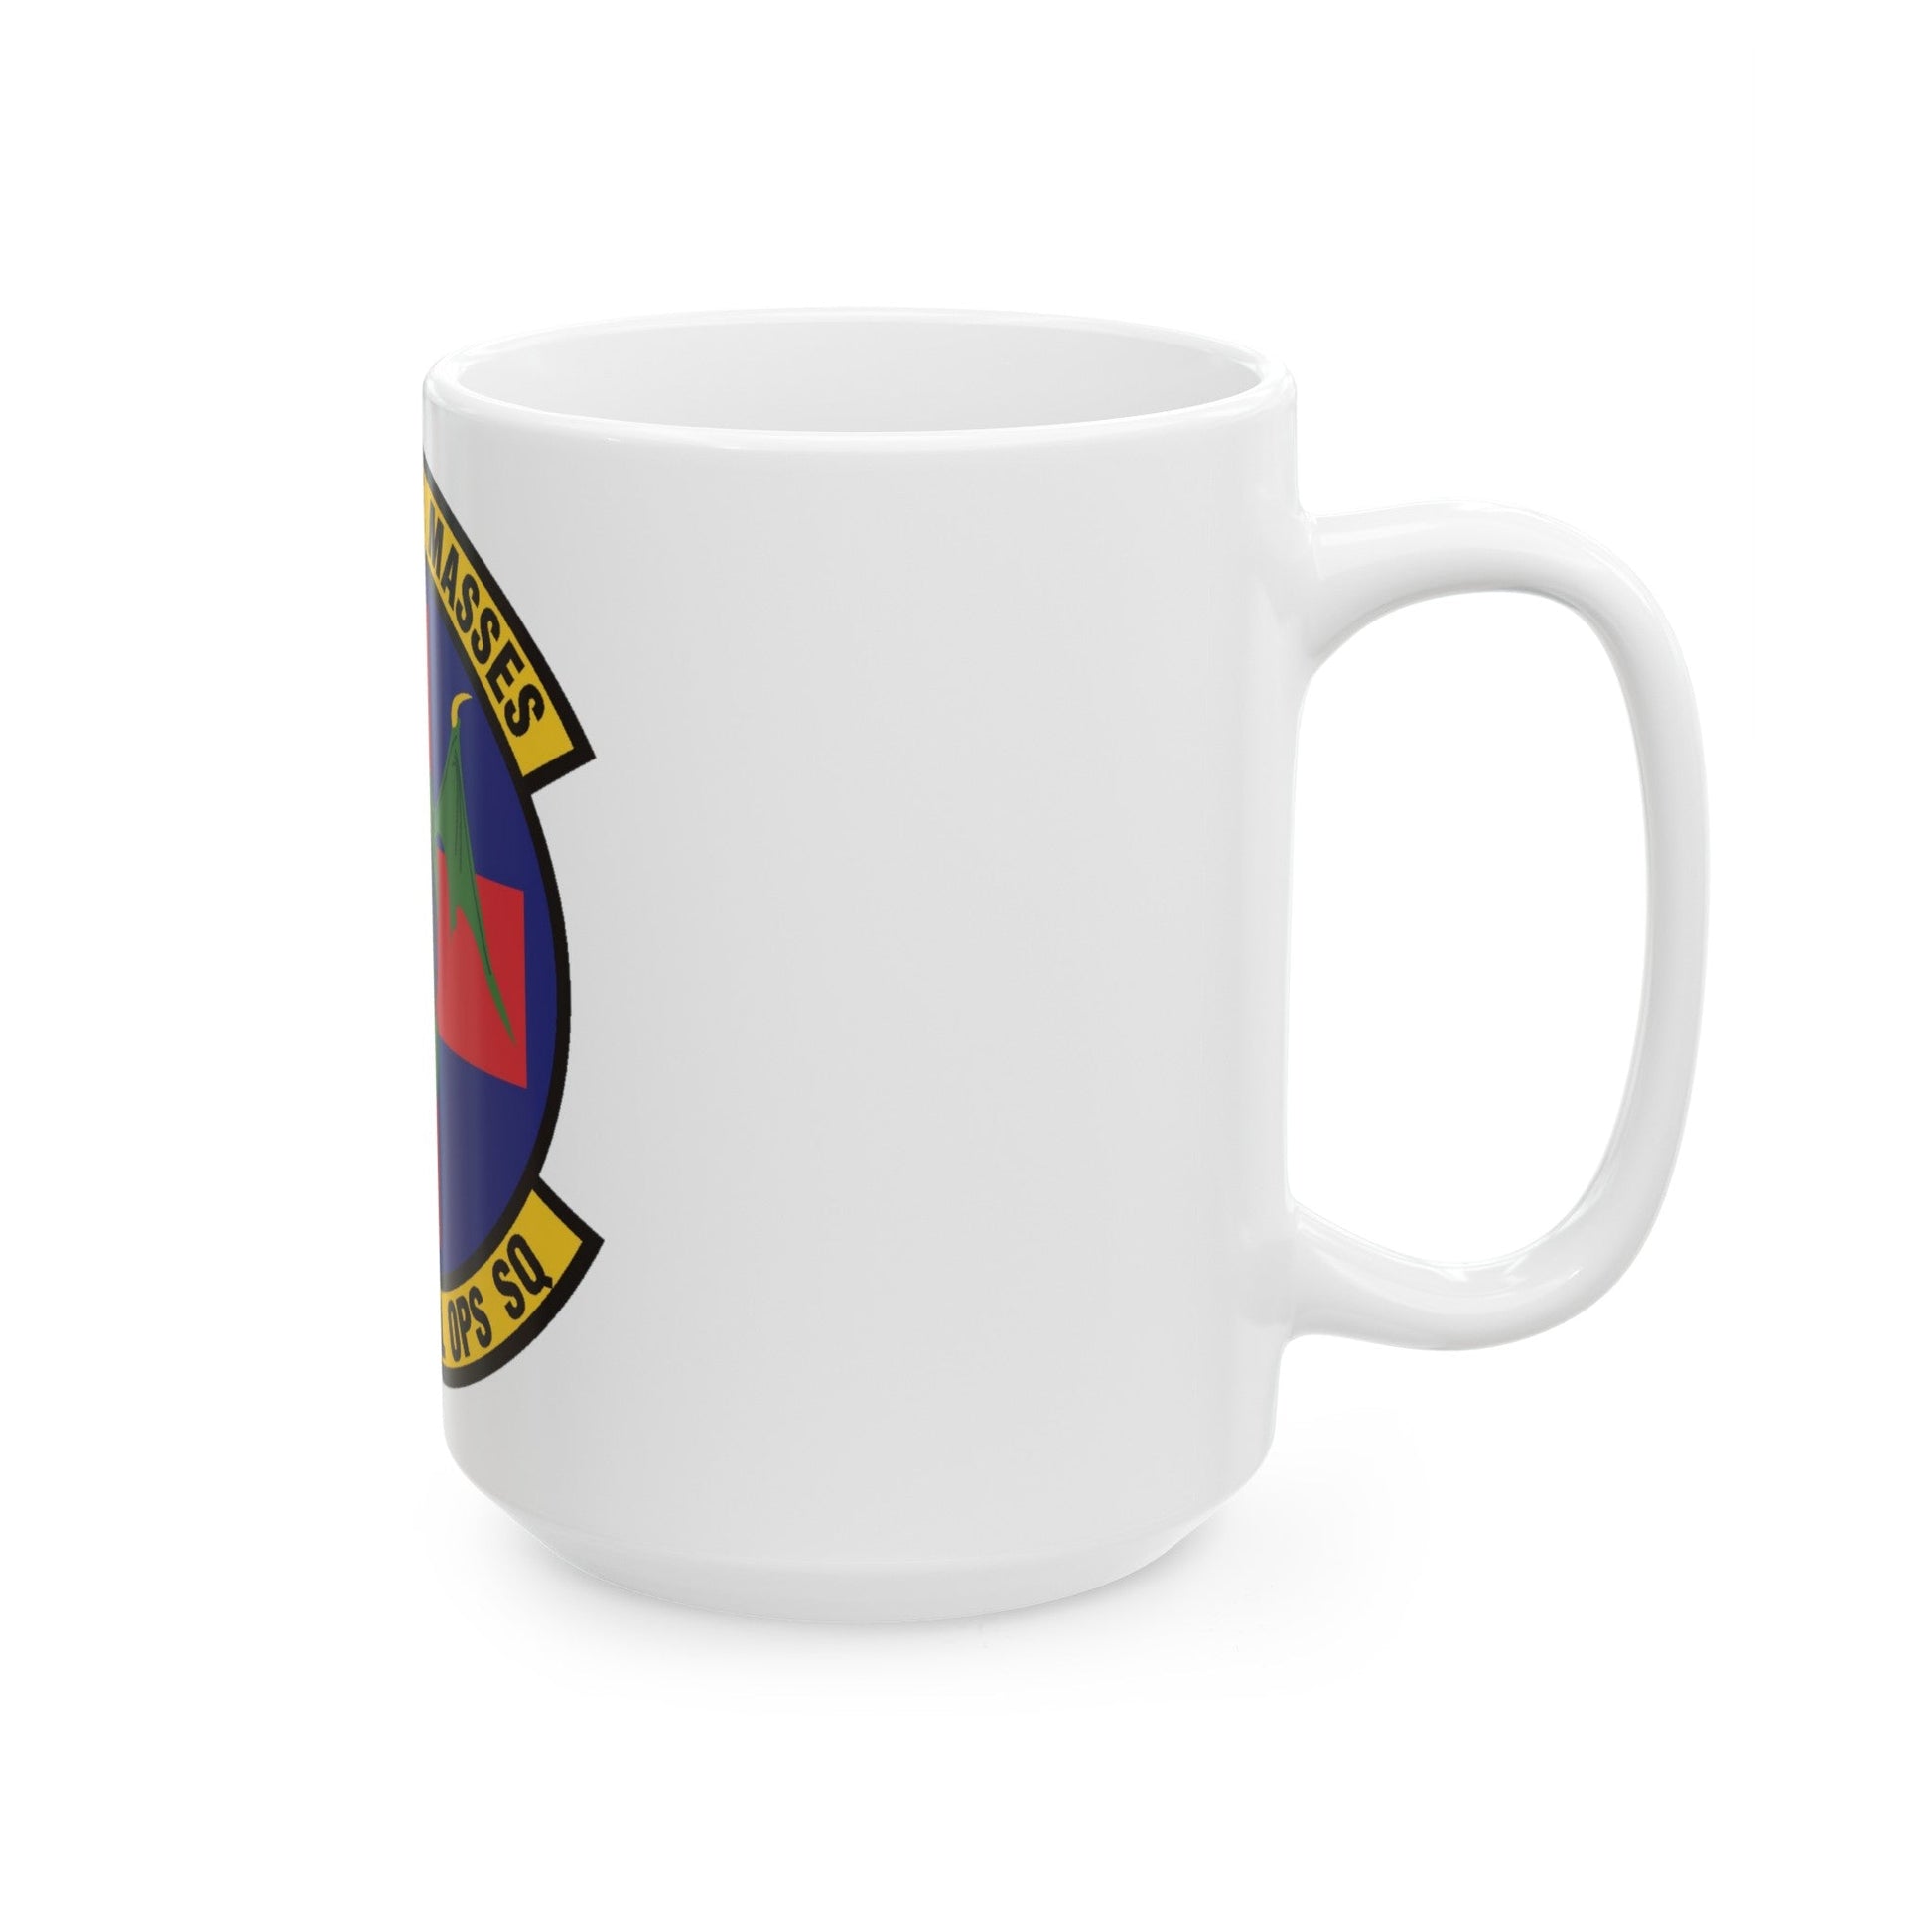 59 Surgical Operations Squadron AETC (U.S. Air Force) White Coffee Mug-The Sticker Space